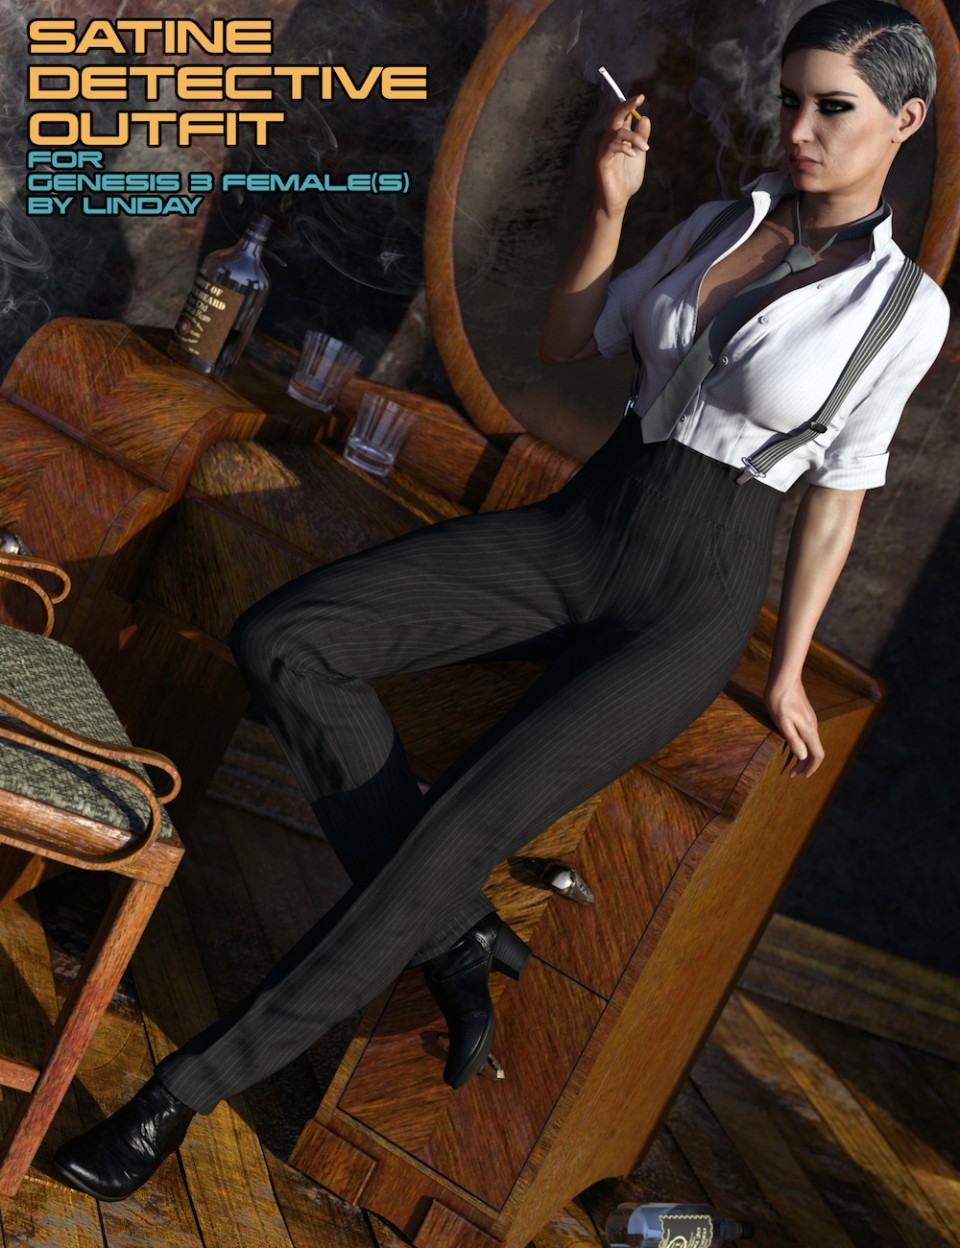 Satine Detective Outfit for Genesis 3 Female(s)